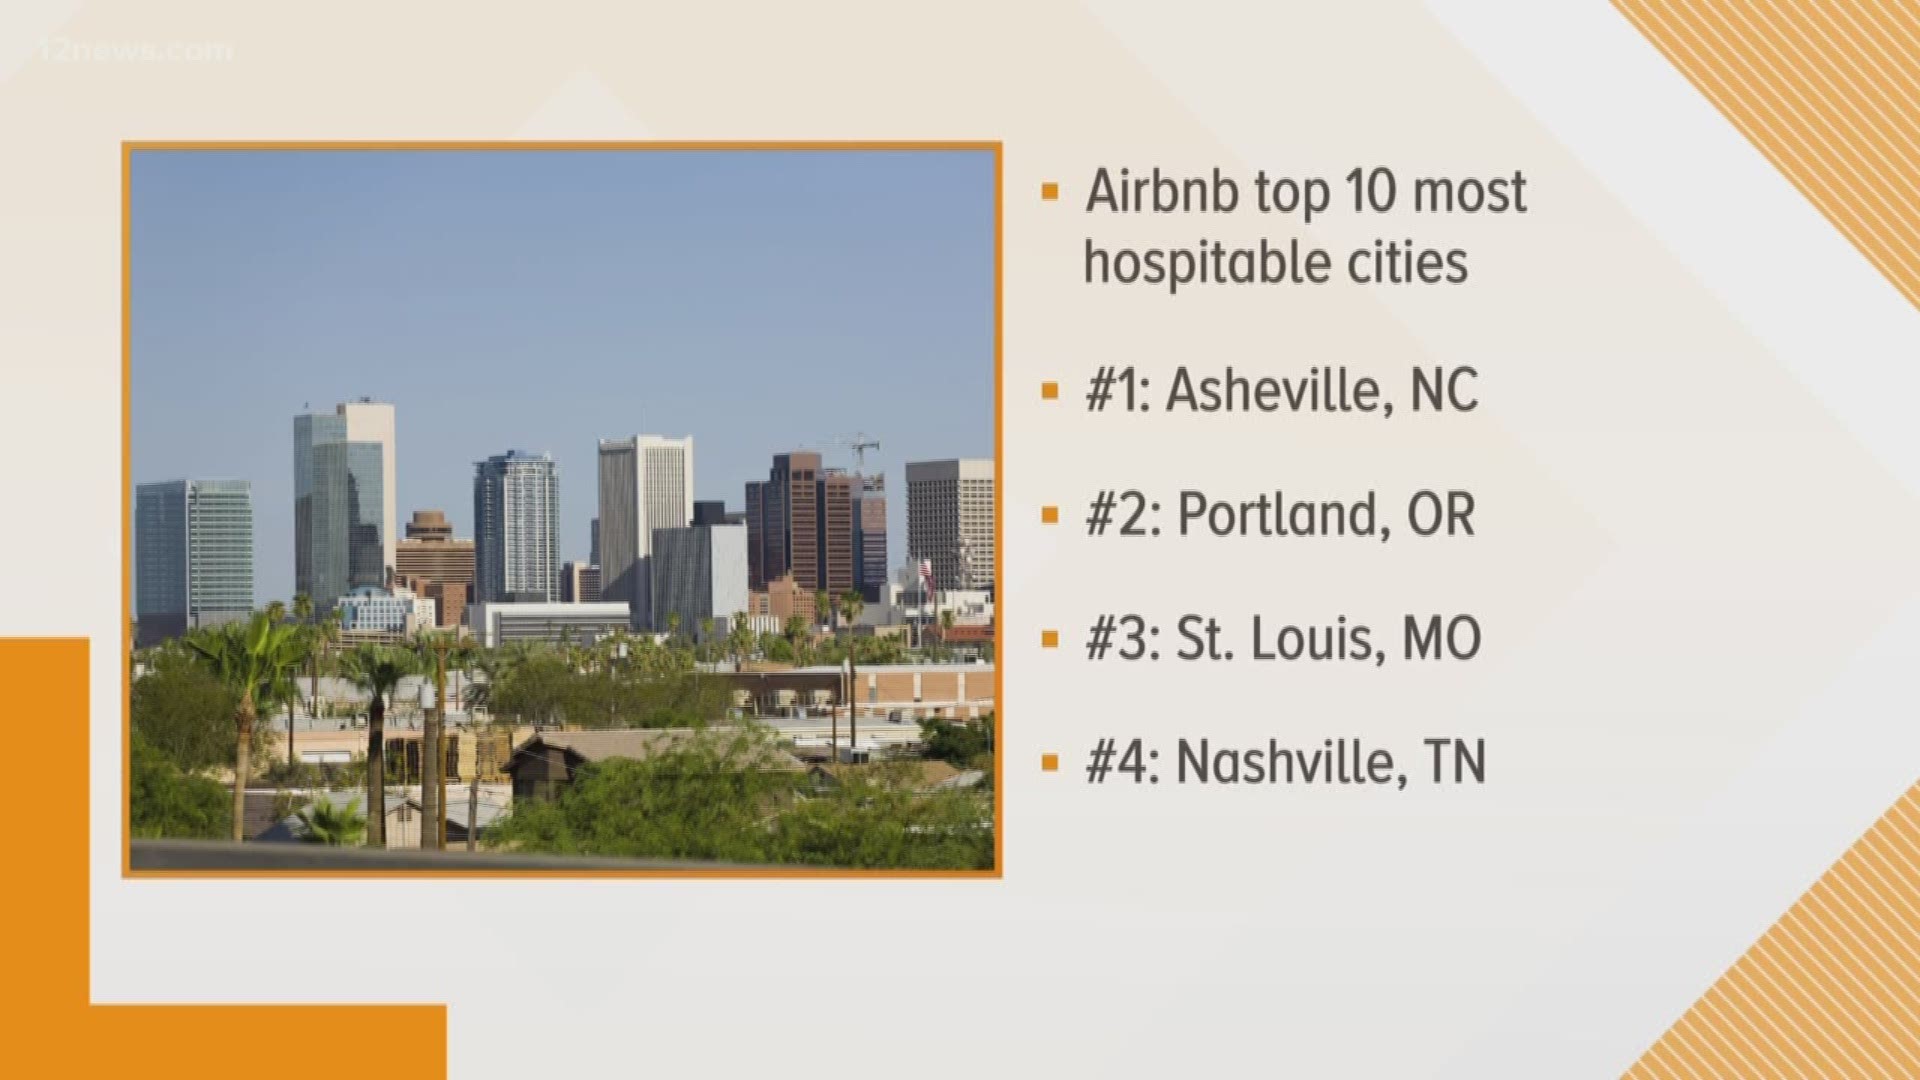 The Valley of the Sun ranked No. 5 on Airbnb's list of the top 10 most hospitable cities in the country.